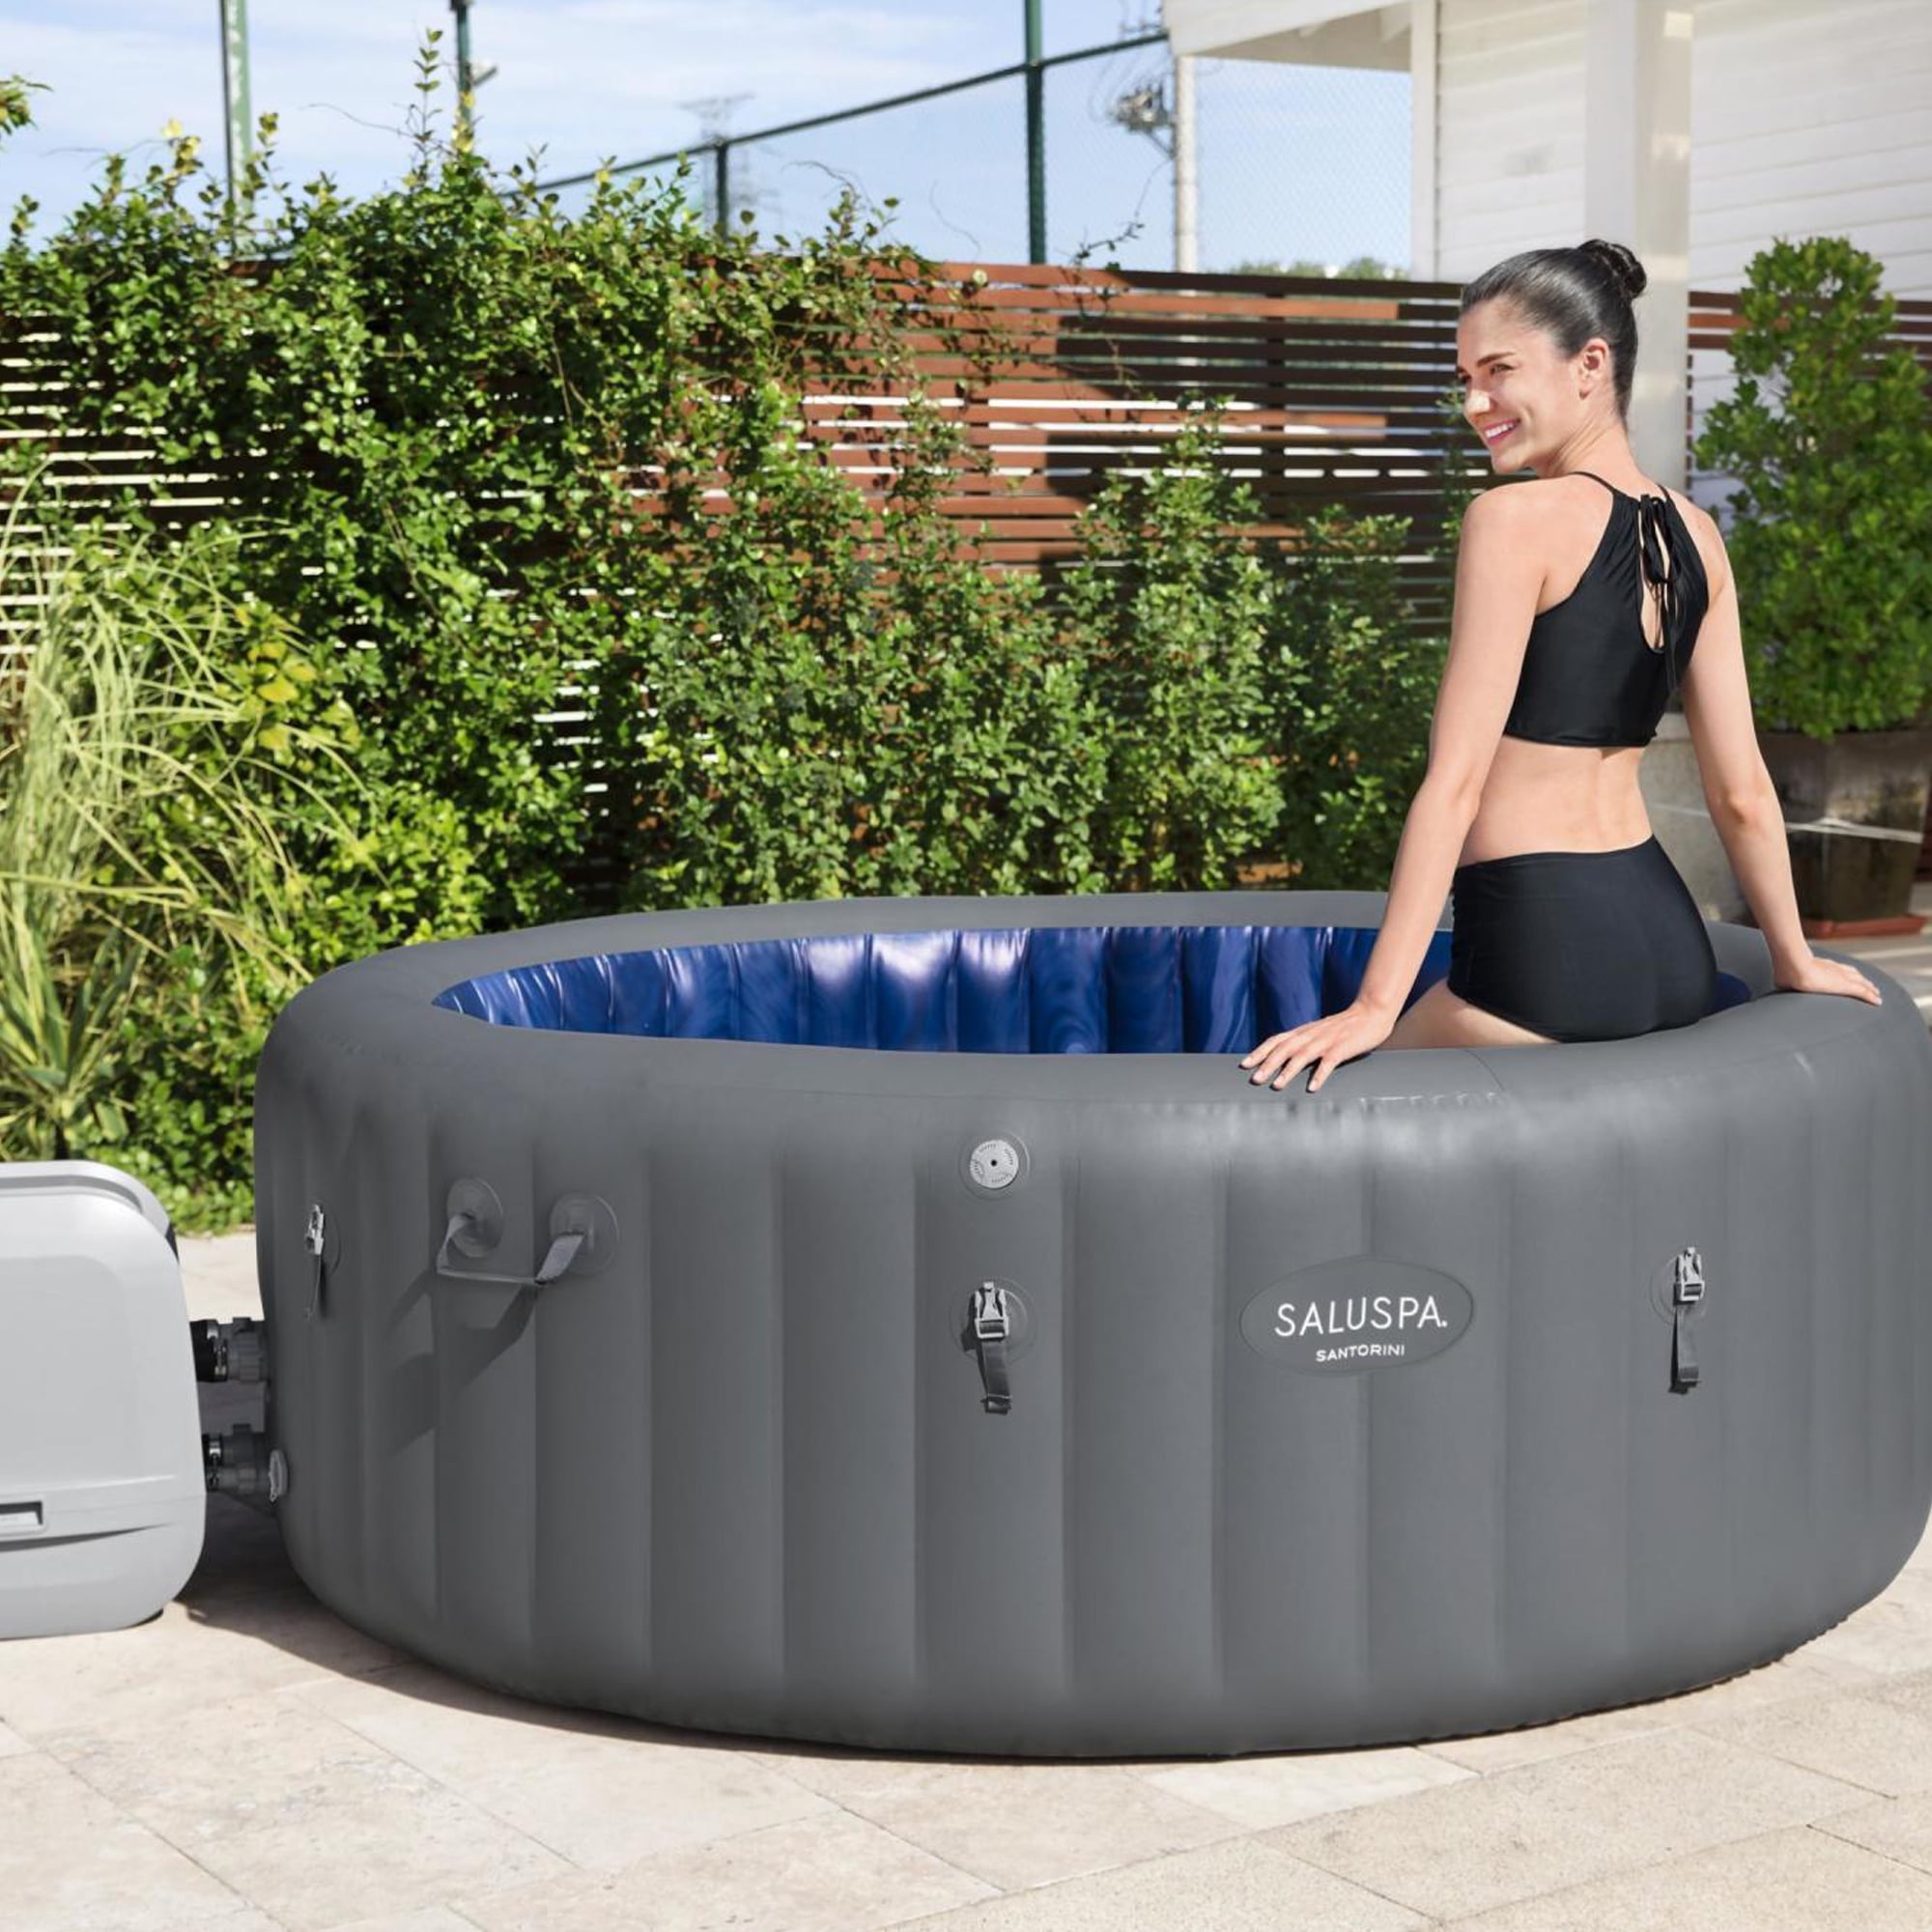 Bestway SaluSpa Santorini HydroJet Tub Jets, Hot Gray 180 with Inflatable